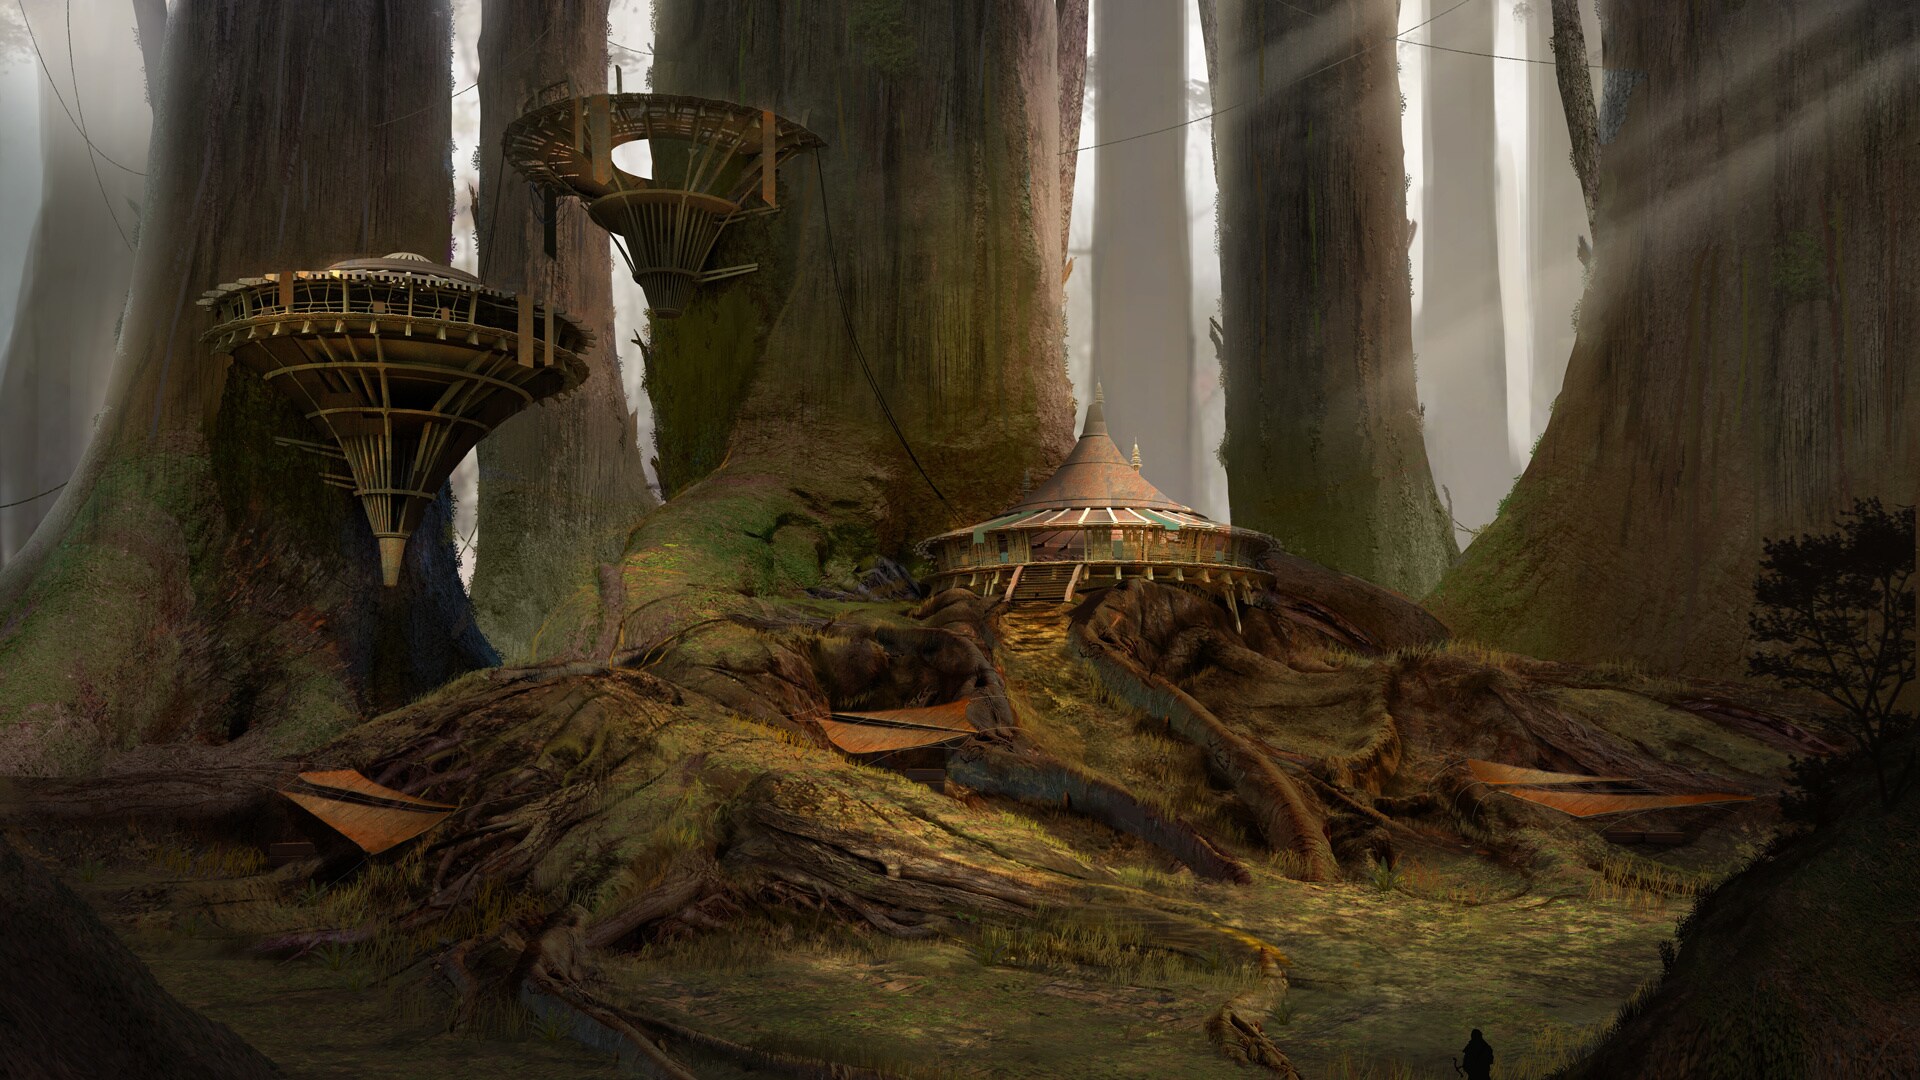 Wookiee sanctuary concept art by Christian Piccolo